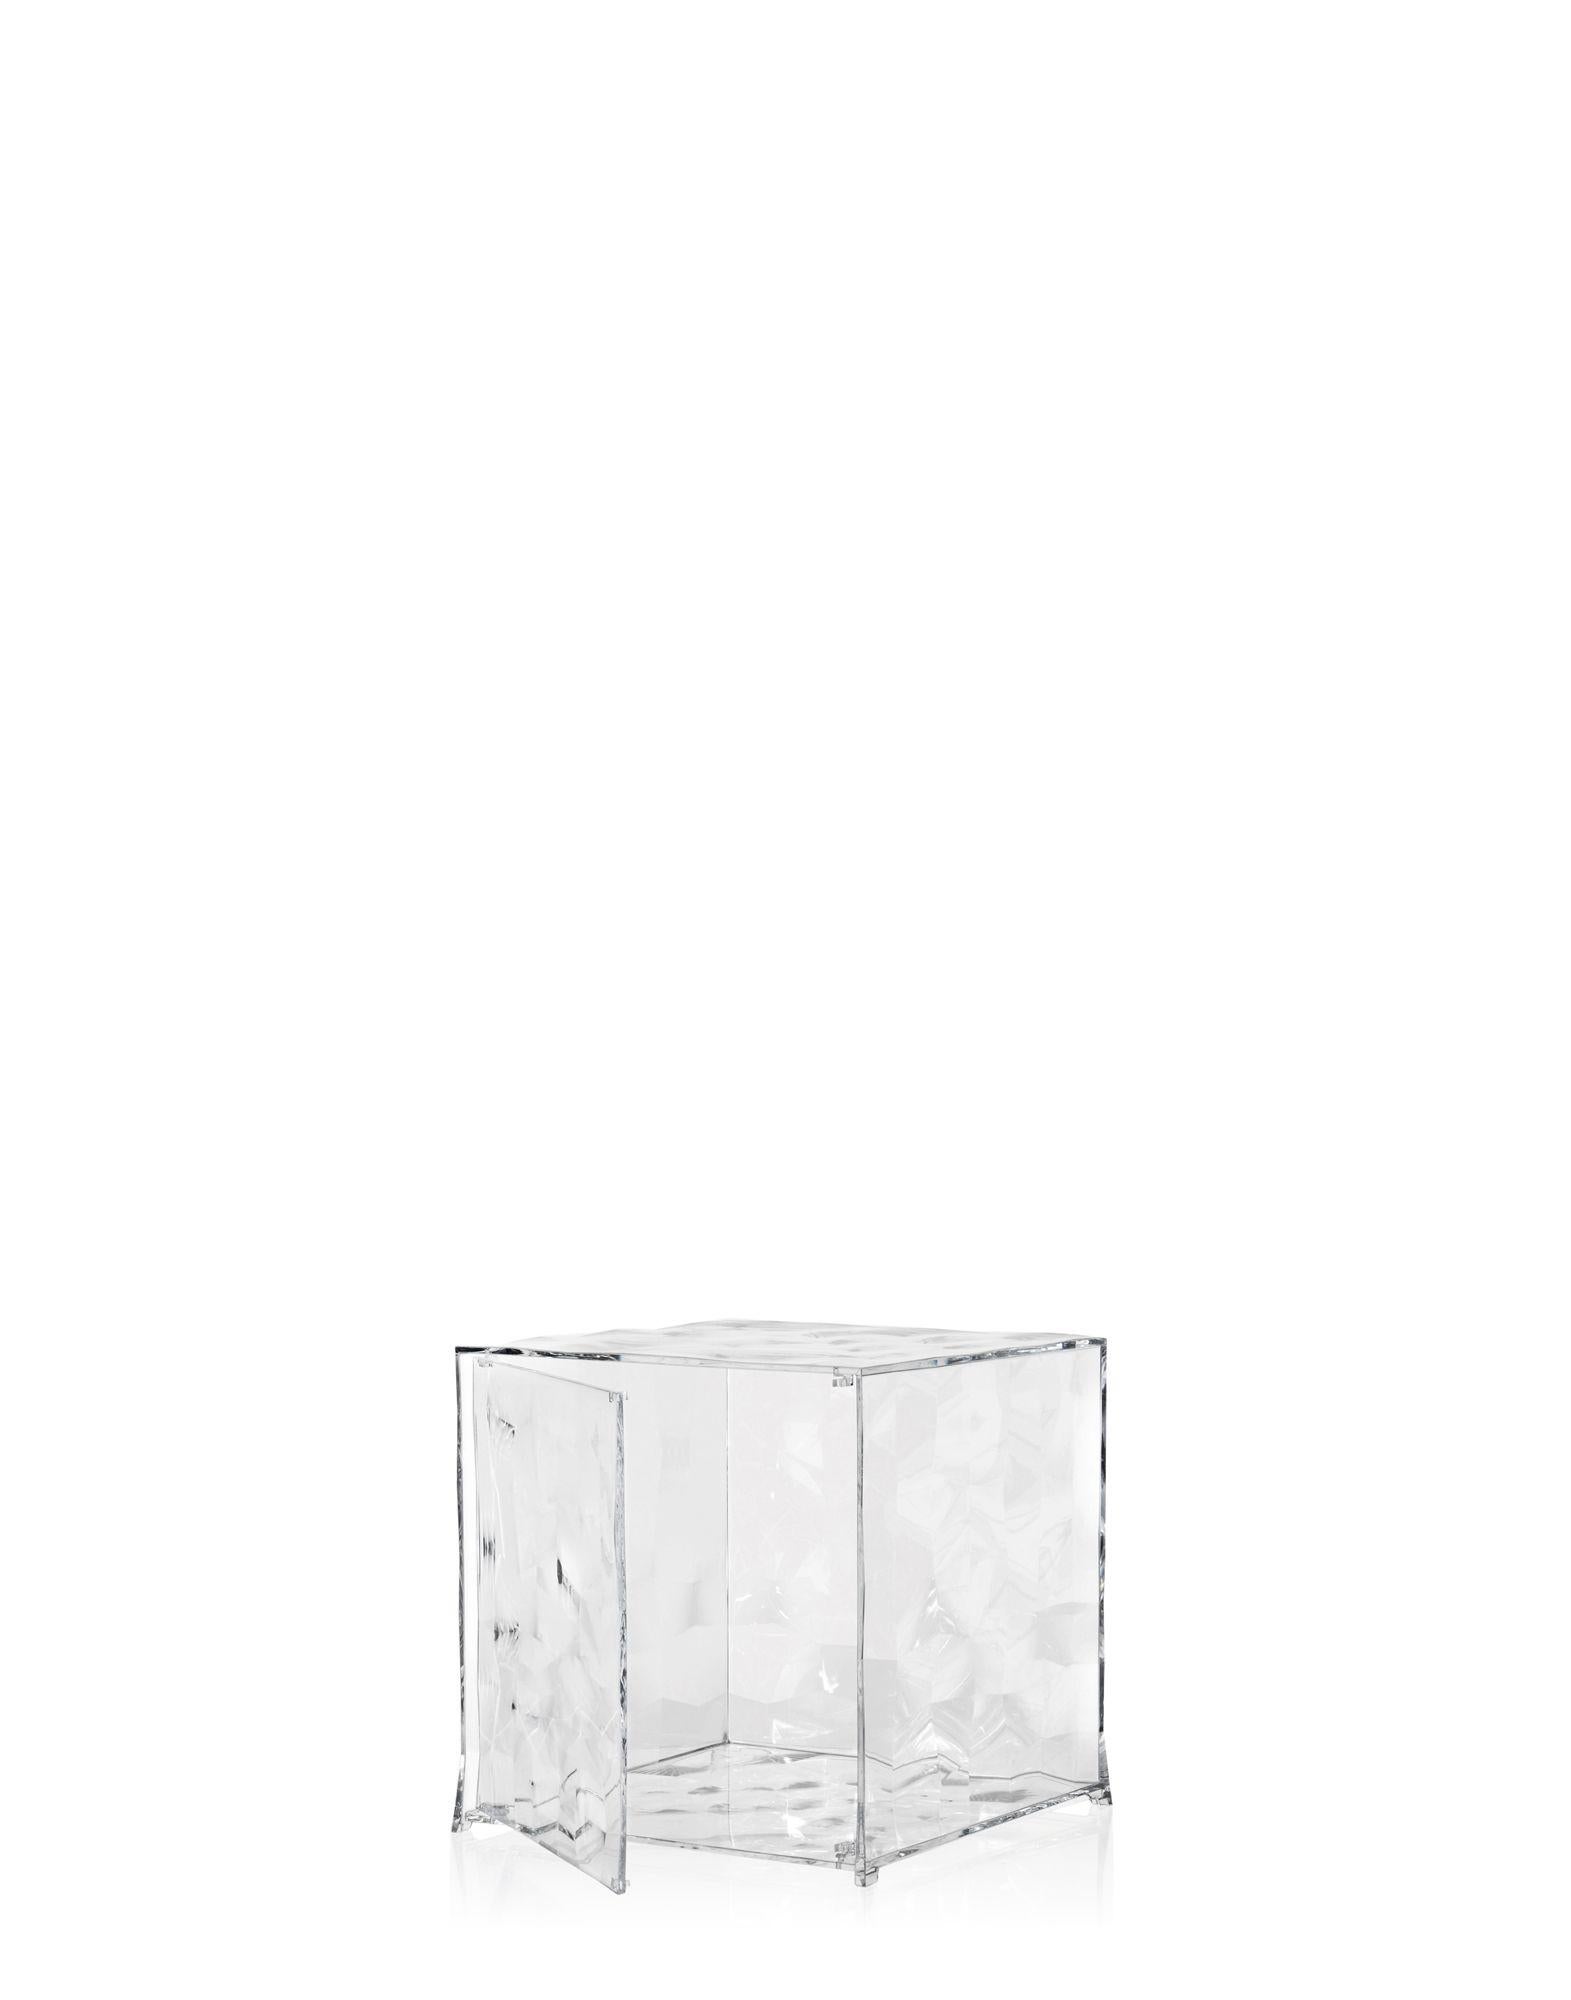 Optic is a container cube which comes in two versions: closed with a door or with one open side. Its surface is strikingly decorated with square based transparent or mirrored pyramids, slightly in relief, which create a strong visual impact. Optic